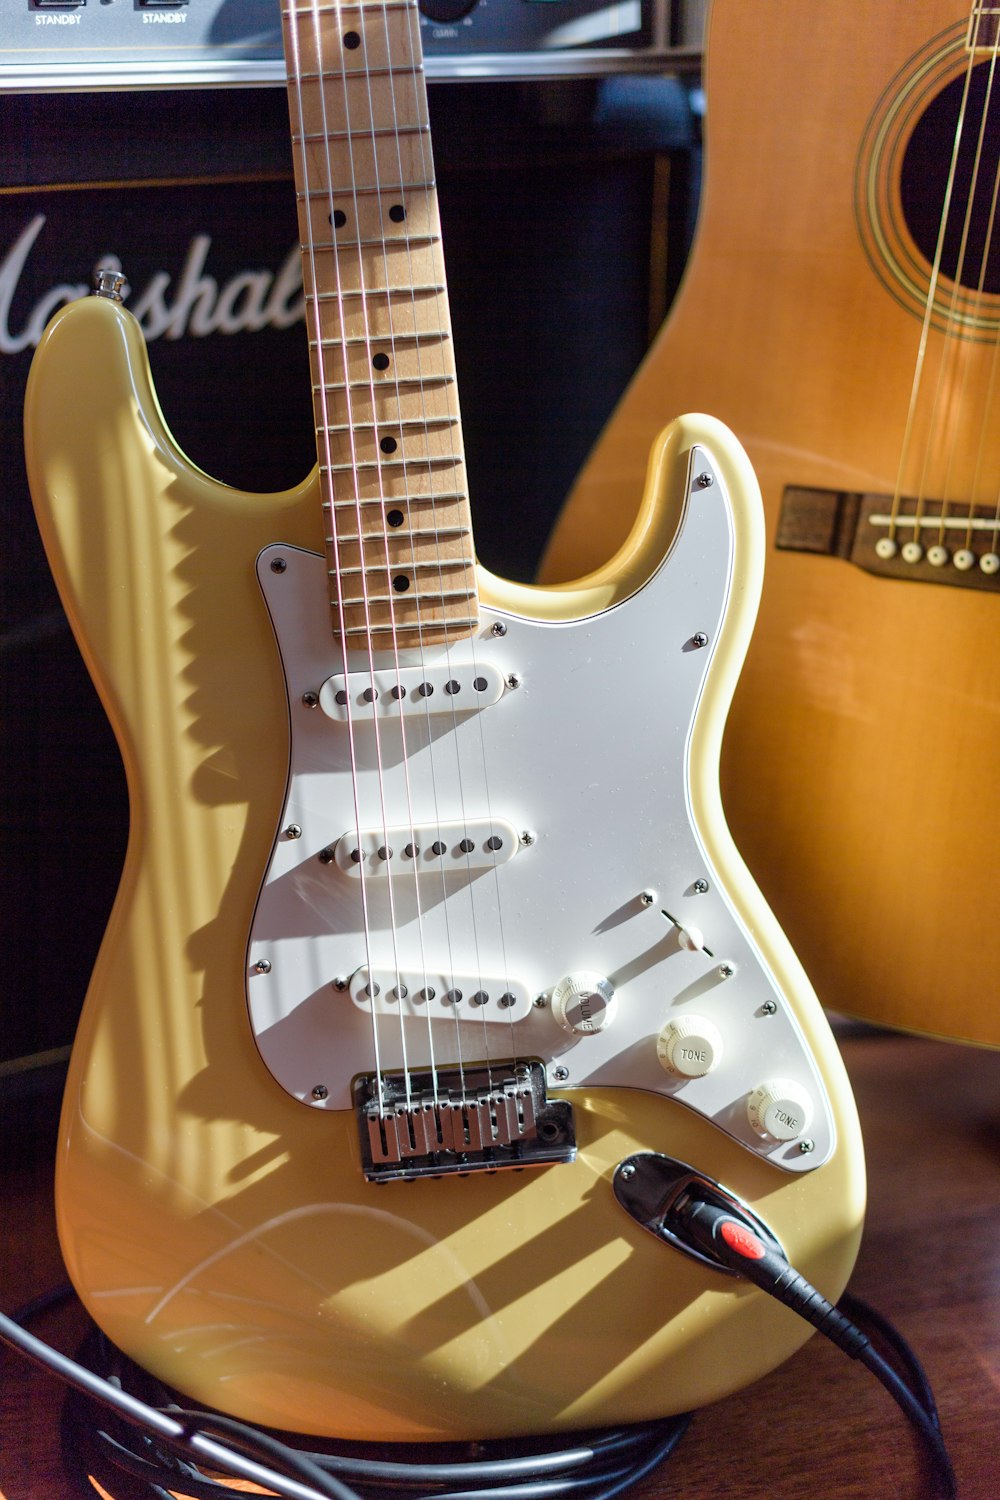 brown and white electric guitar